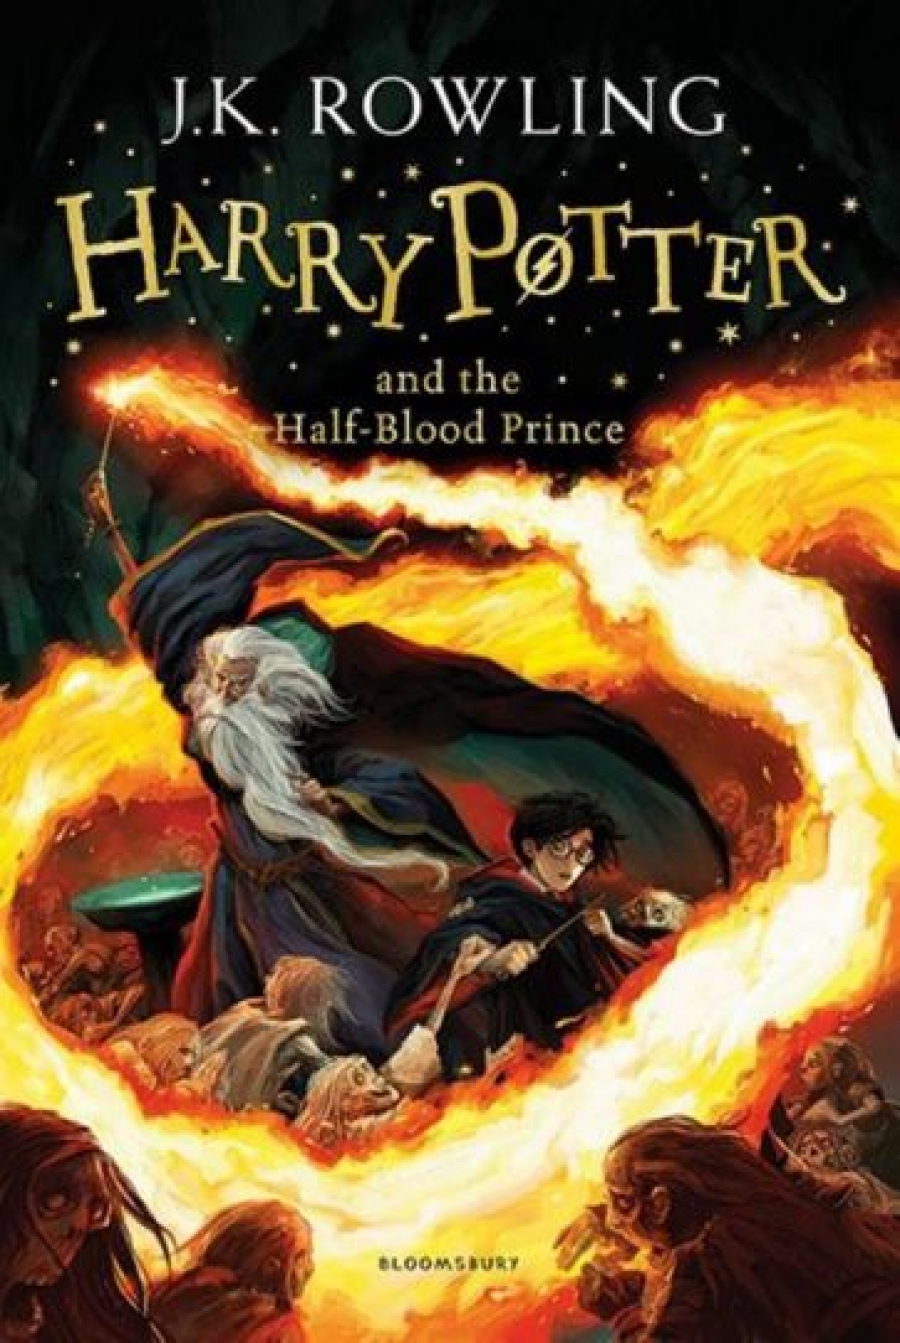 J. K. Rowling Harry Potter and the Half-Blood Prince (Book 6) - Hardcover 